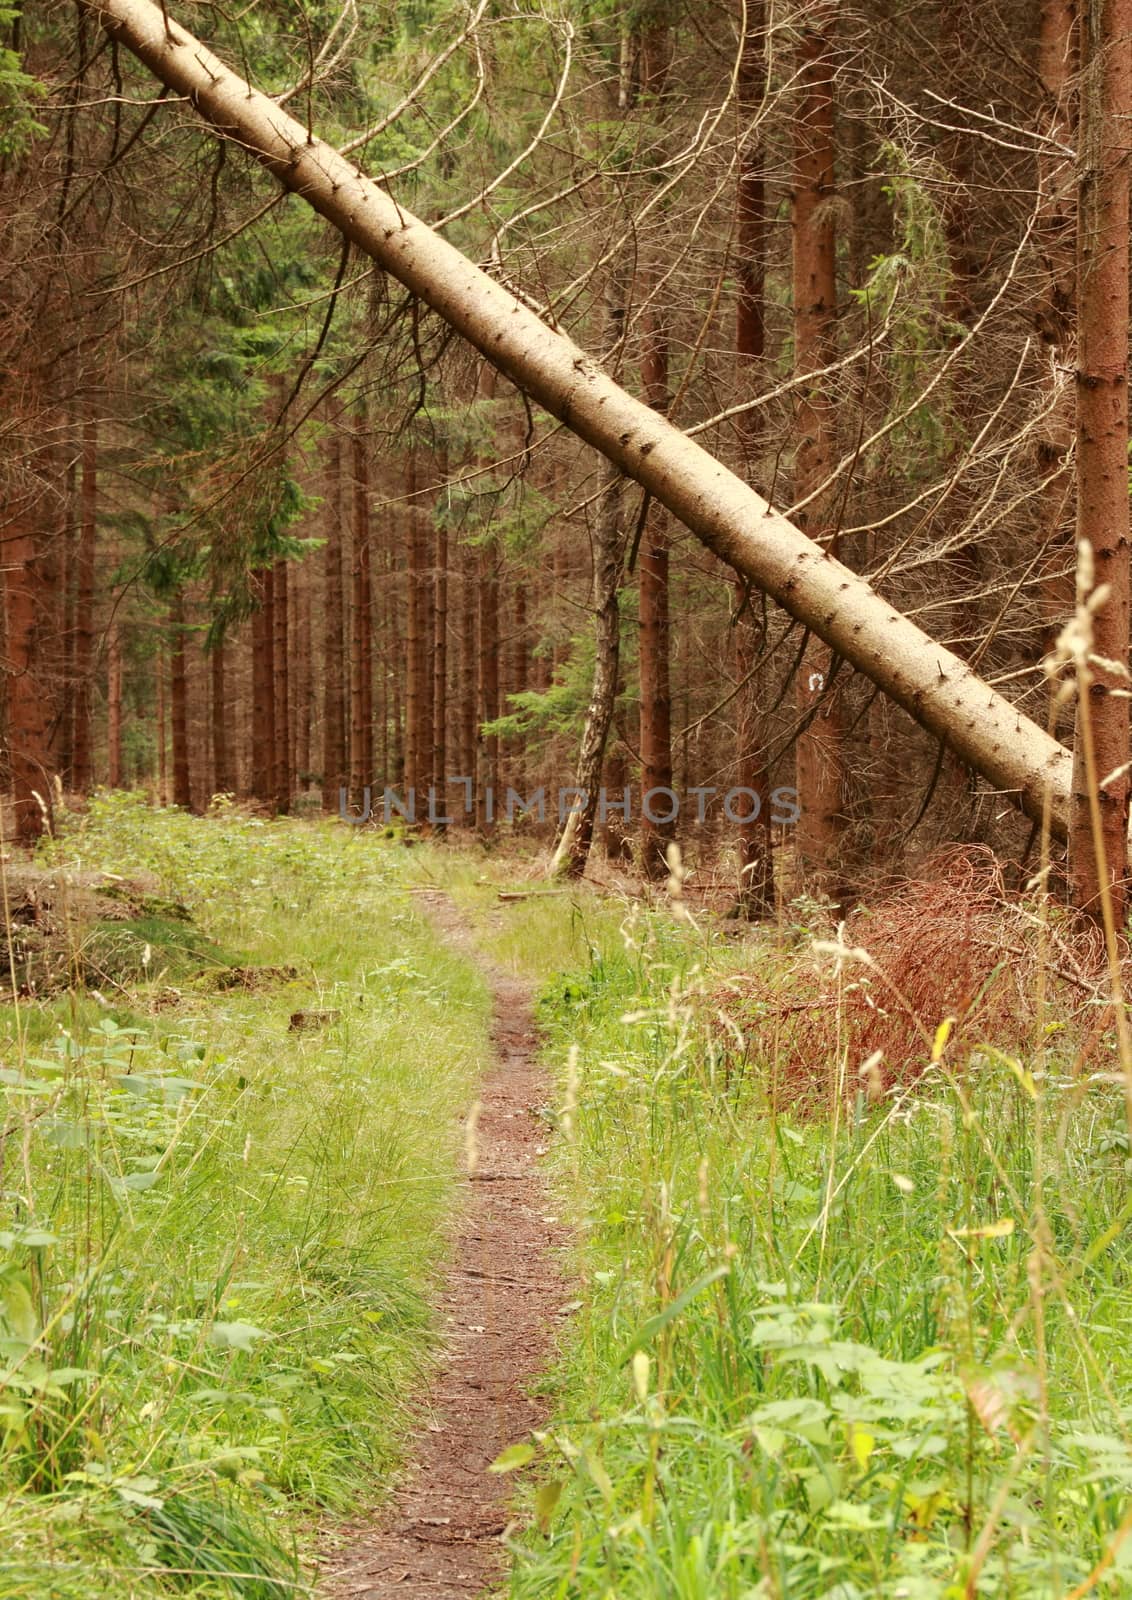 Forest path with fallen tree from an autumn storm